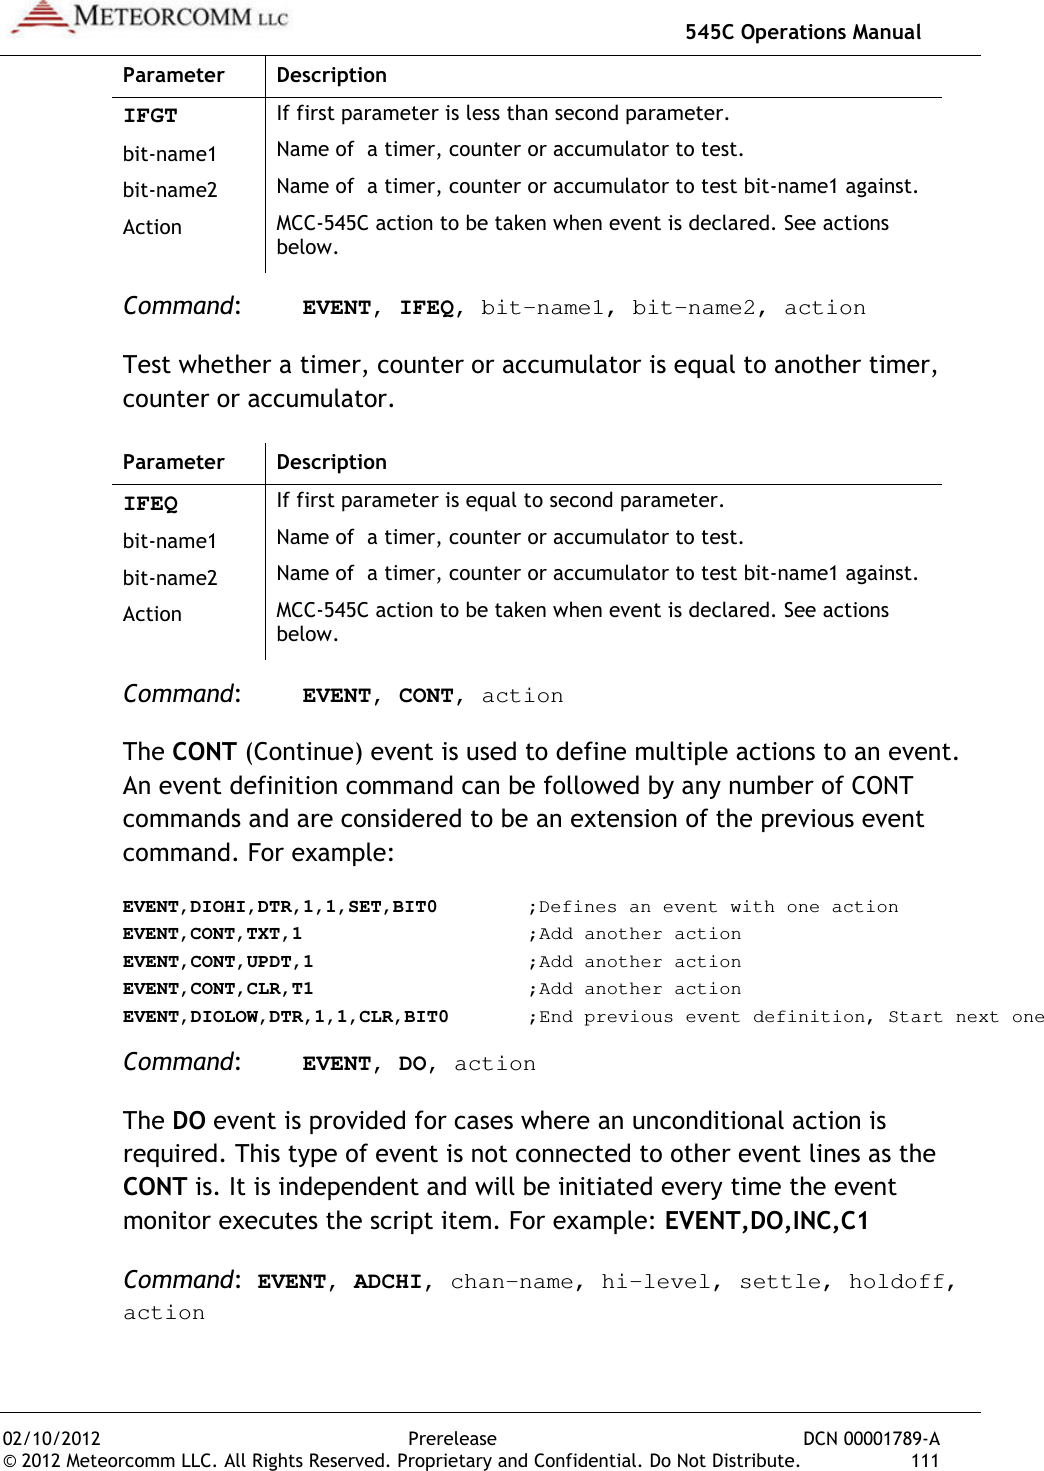   545C Operations Manual 02/10/2012  Prerelease  DCN 00001789-A © 2012 Meteorcomm LLC. All Rights Reserved. Proprietary and Confidential. Do Not Distribute.  111 Parameter  Description IFGT If first parameter is less than second parameter. bit-name1  Name of  a timer, counter or accumulator to test. bit-name2 Name of  a timer, counter or accumulator to test bit-name1 against. Action MCC-545C action to be taken when event is declared. See actions below. Command:  EVENT, IFEQ, bit-name1, bit-name2, action Test whether a timer, counter or accumulator is equal to another timer, counter or accumulator. Parameter  Description IFEQ If first parameter is equal to second parameter. bit-name1  Name of  a timer, counter or accumulator to test. bit-name2 Name of  a timer, counter or accumulator to test bit-name1 against. Action MCC-545C action to be taken when event is declared. See actions below. Command:  EVENT, CONT, action The CONT (Continue) event is used to define multiple actions to an event. An event definition command can be followed by any number of CONT commands and are considered to be an extension of the previous event command. For example: EVENT,DIOHI,DTR,1,1,SET,BIT0    ;Defines an event with one action EVENT,CONT,TXT,1      ;Add another action EVENT,CONT,UPDT,1      ;Add another action EVENT,CONT,CLR,T1      ;Add another action EVENT,DIOLOW,DTR,1,1,CLR,BIT0   ;End previous event definition, Start next one Command:  EVENT, DO, action The DO event is provided for cases where an unconditional action is required. This type of event is not connected to other event lines as the CONT is. It is independent and will be initiated every time the event monitor executes the script item. For example: EVENT,DO,INC,C1 Command:  EVENT, ADCHI, chan-name, hi-level, settle, holdoff, action 